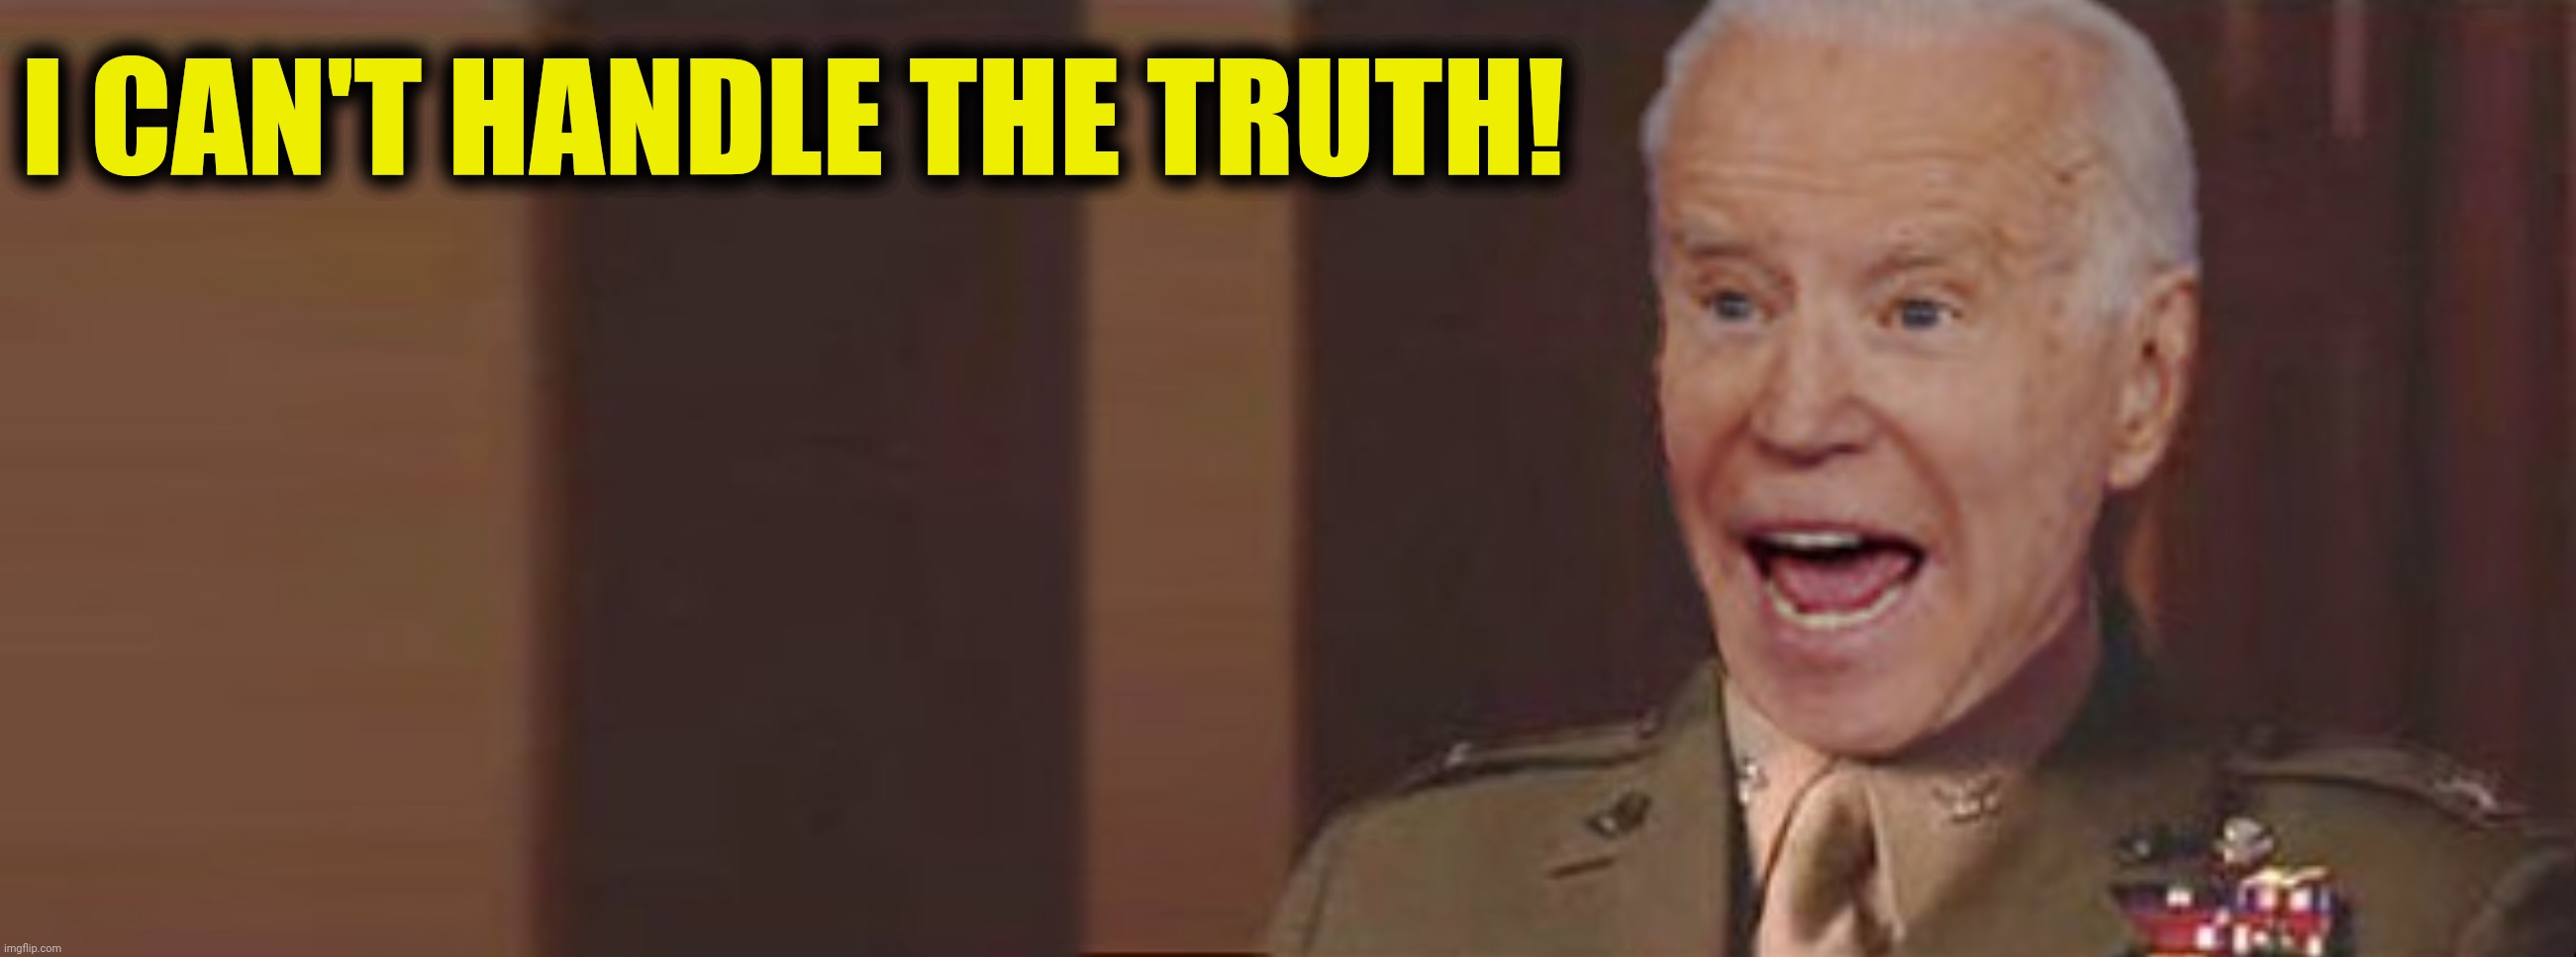 Bad Photoshop Sunday presents:  You don't deserve the truth! | I CAN'T HANDLE THE TRUTH! | image tagged in bad photoshop sunday,a few good men,joe biden | made w/ Imgflip meme maker